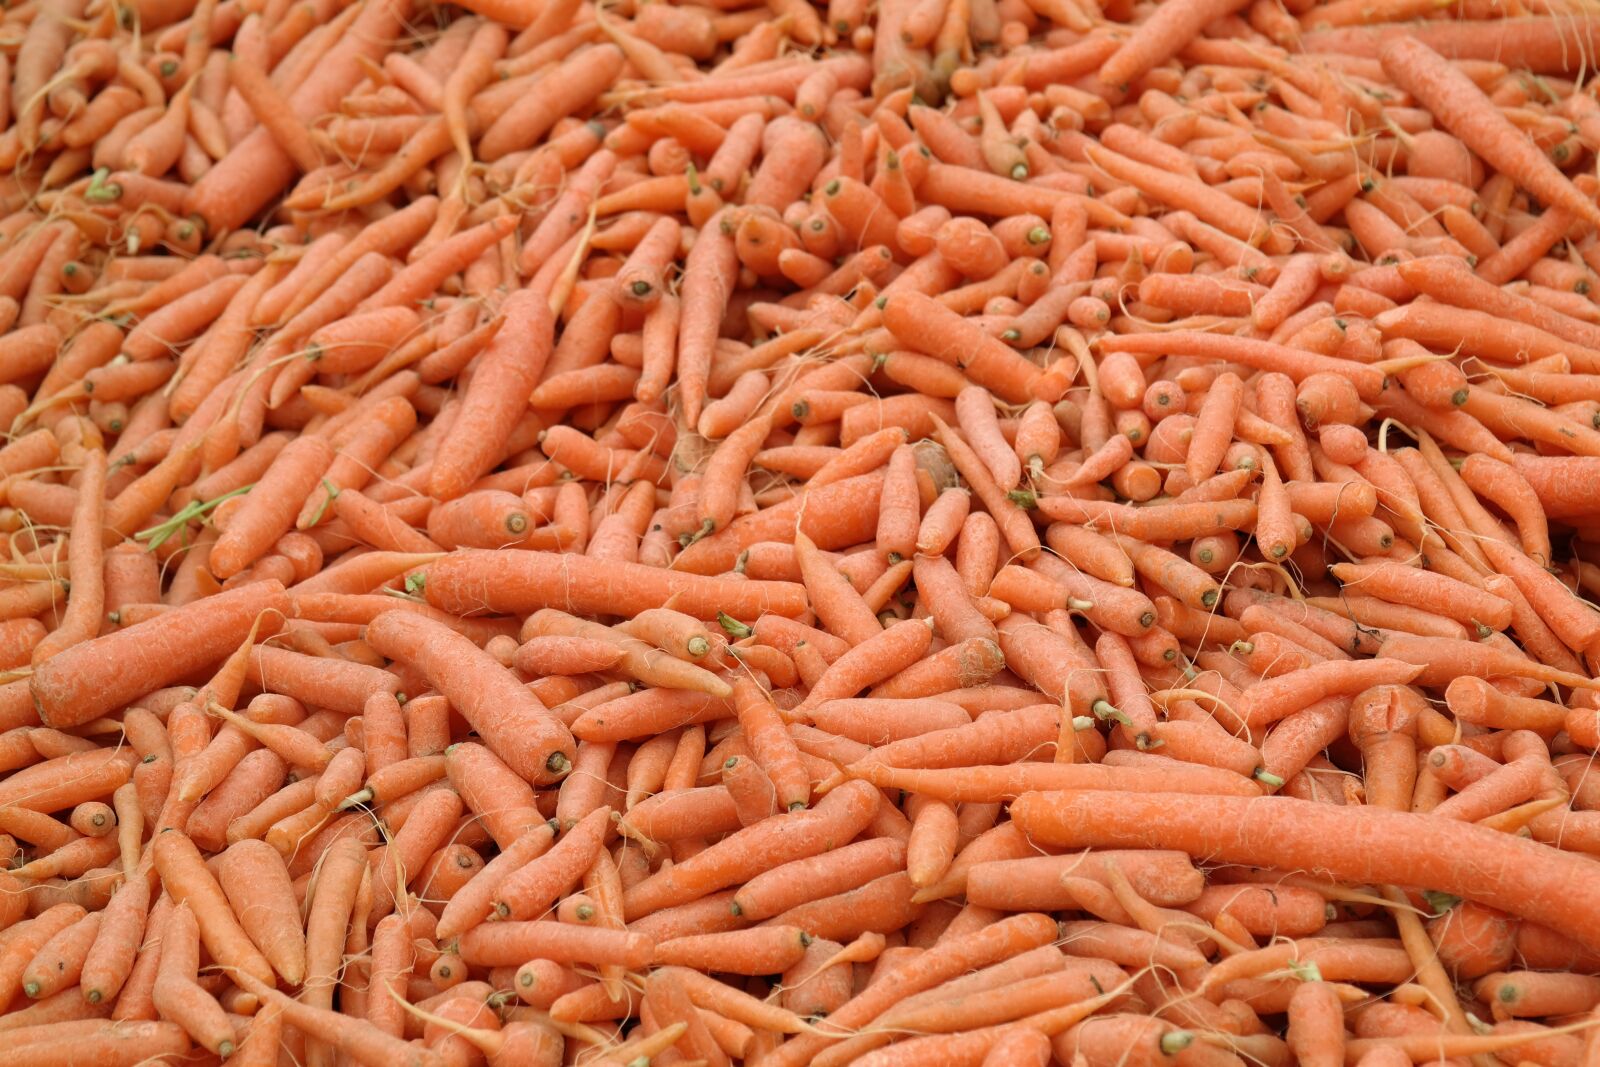 Samsung NX300 sample photo. Carrots, vegetables, mohr practice photography